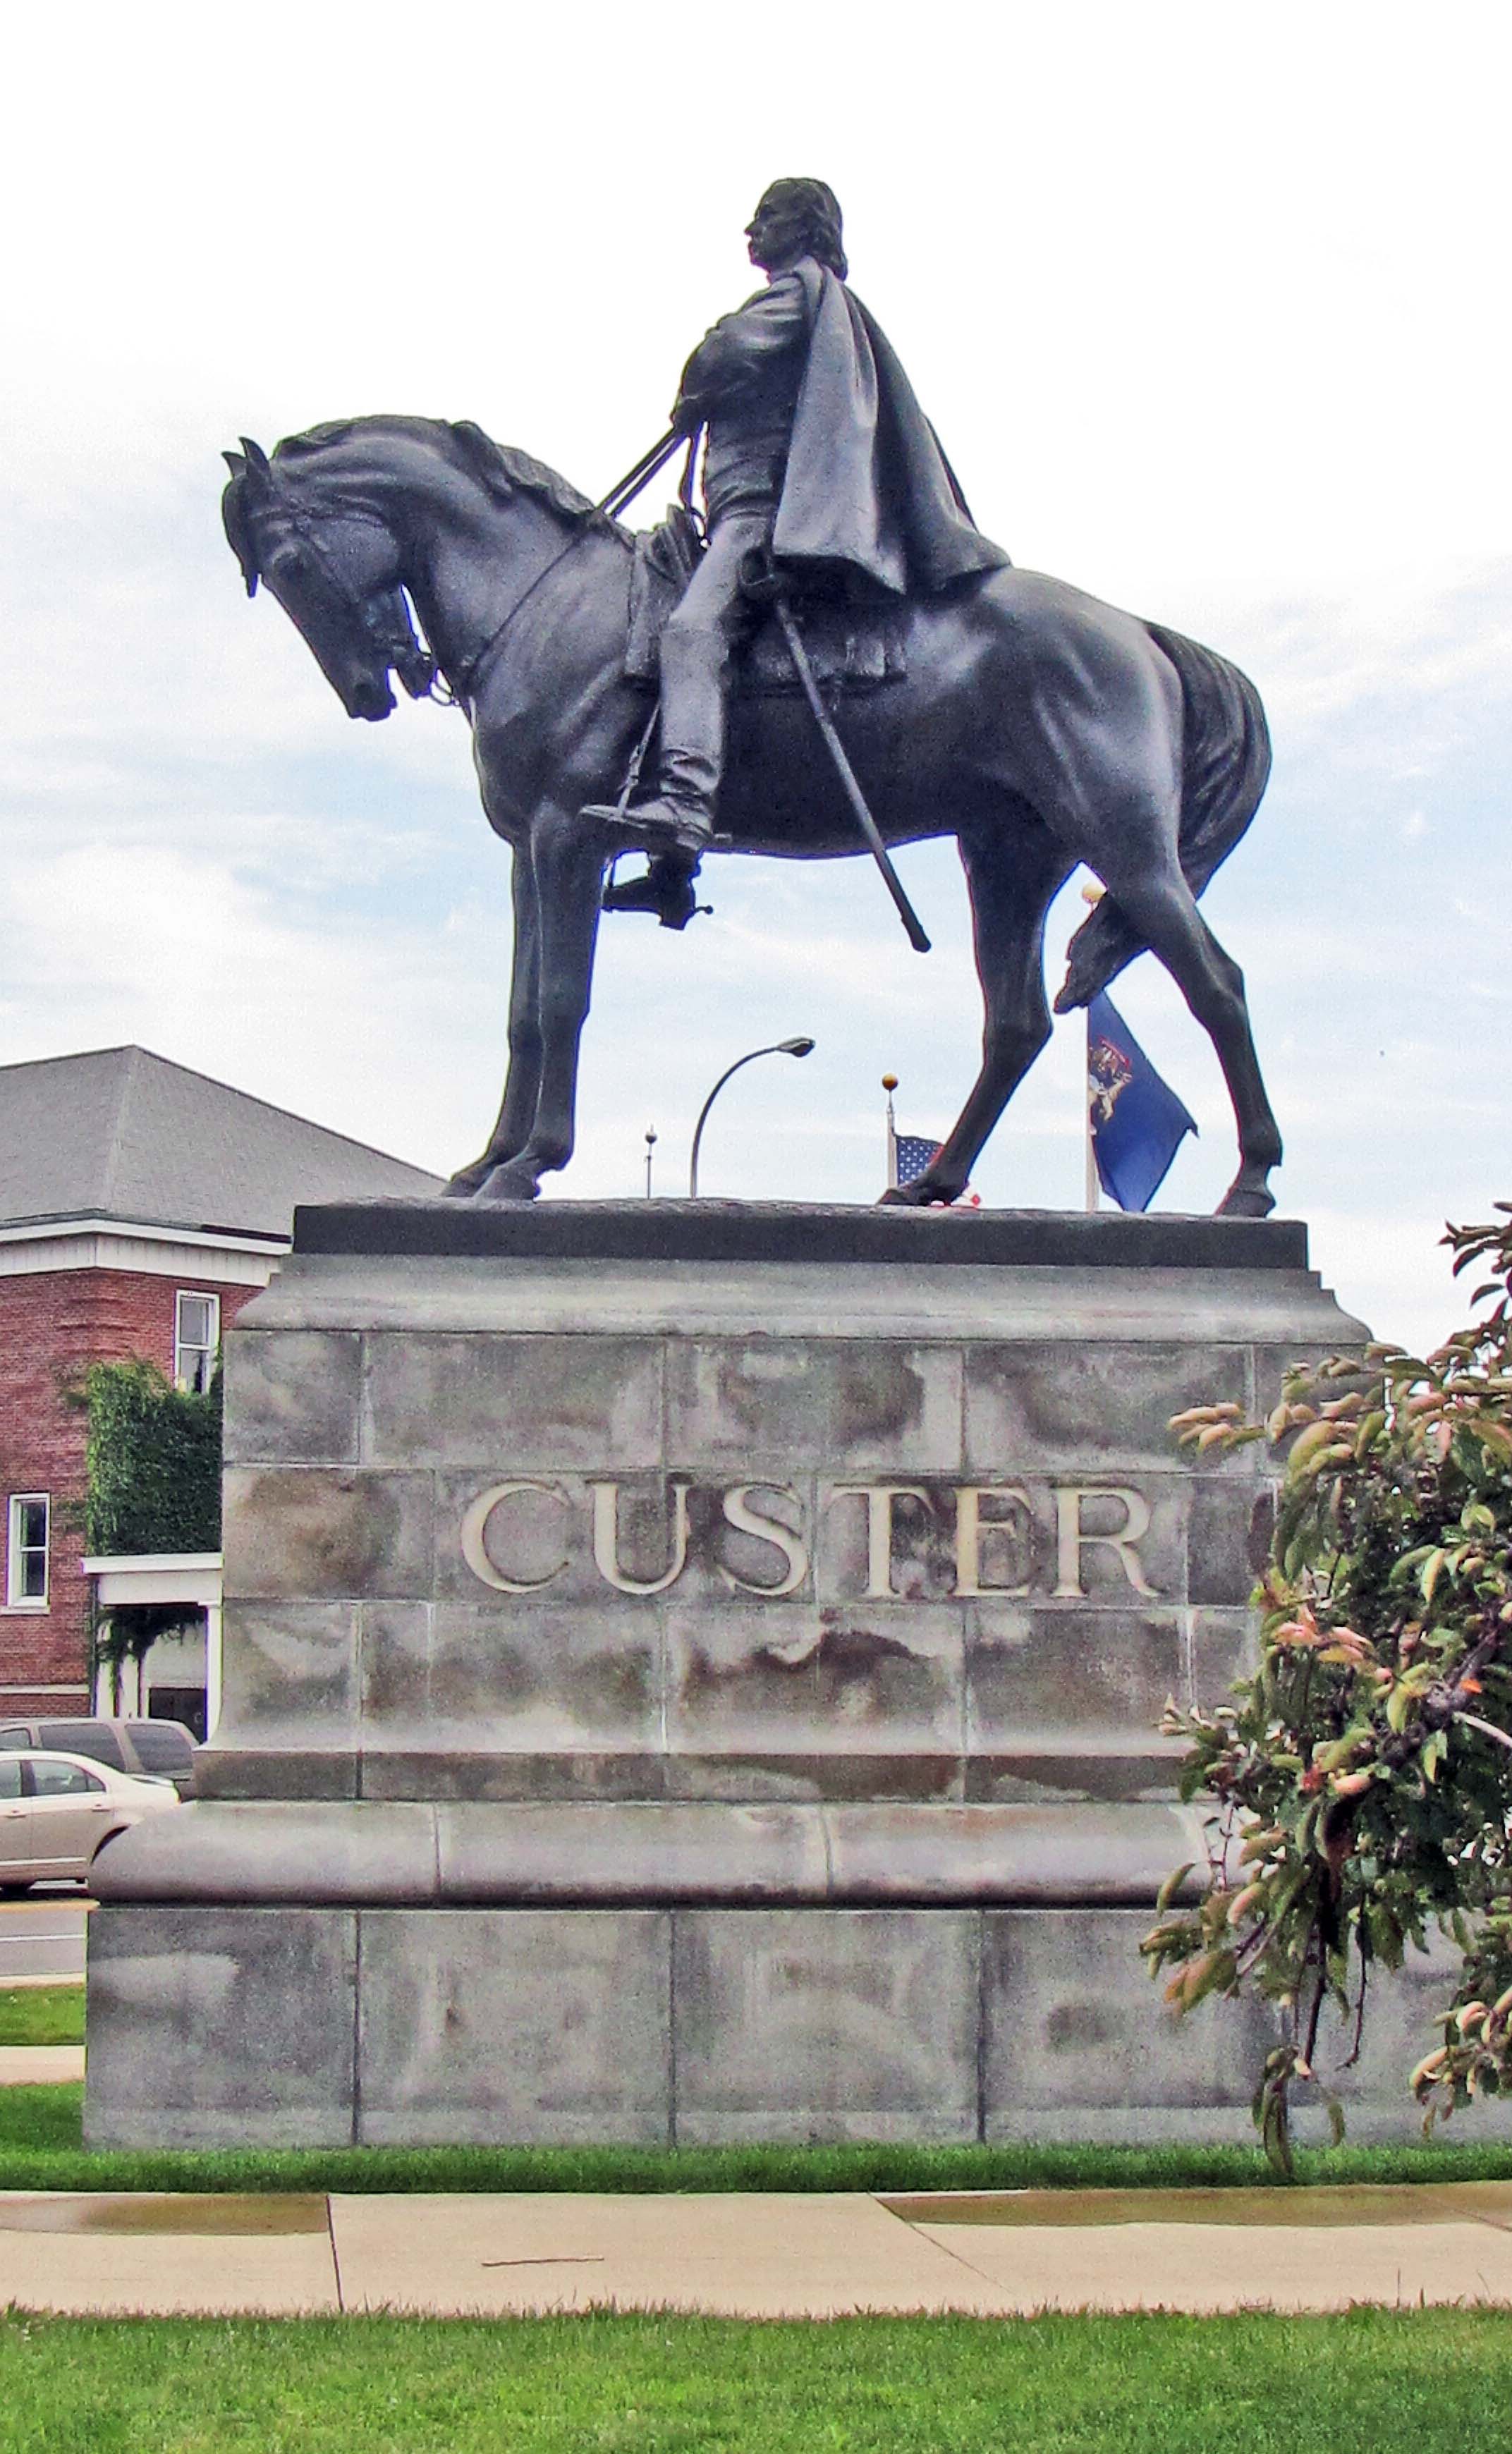 1910: President Taft Visits Monroe to Dedicate Statue of General George Armstrong Custer